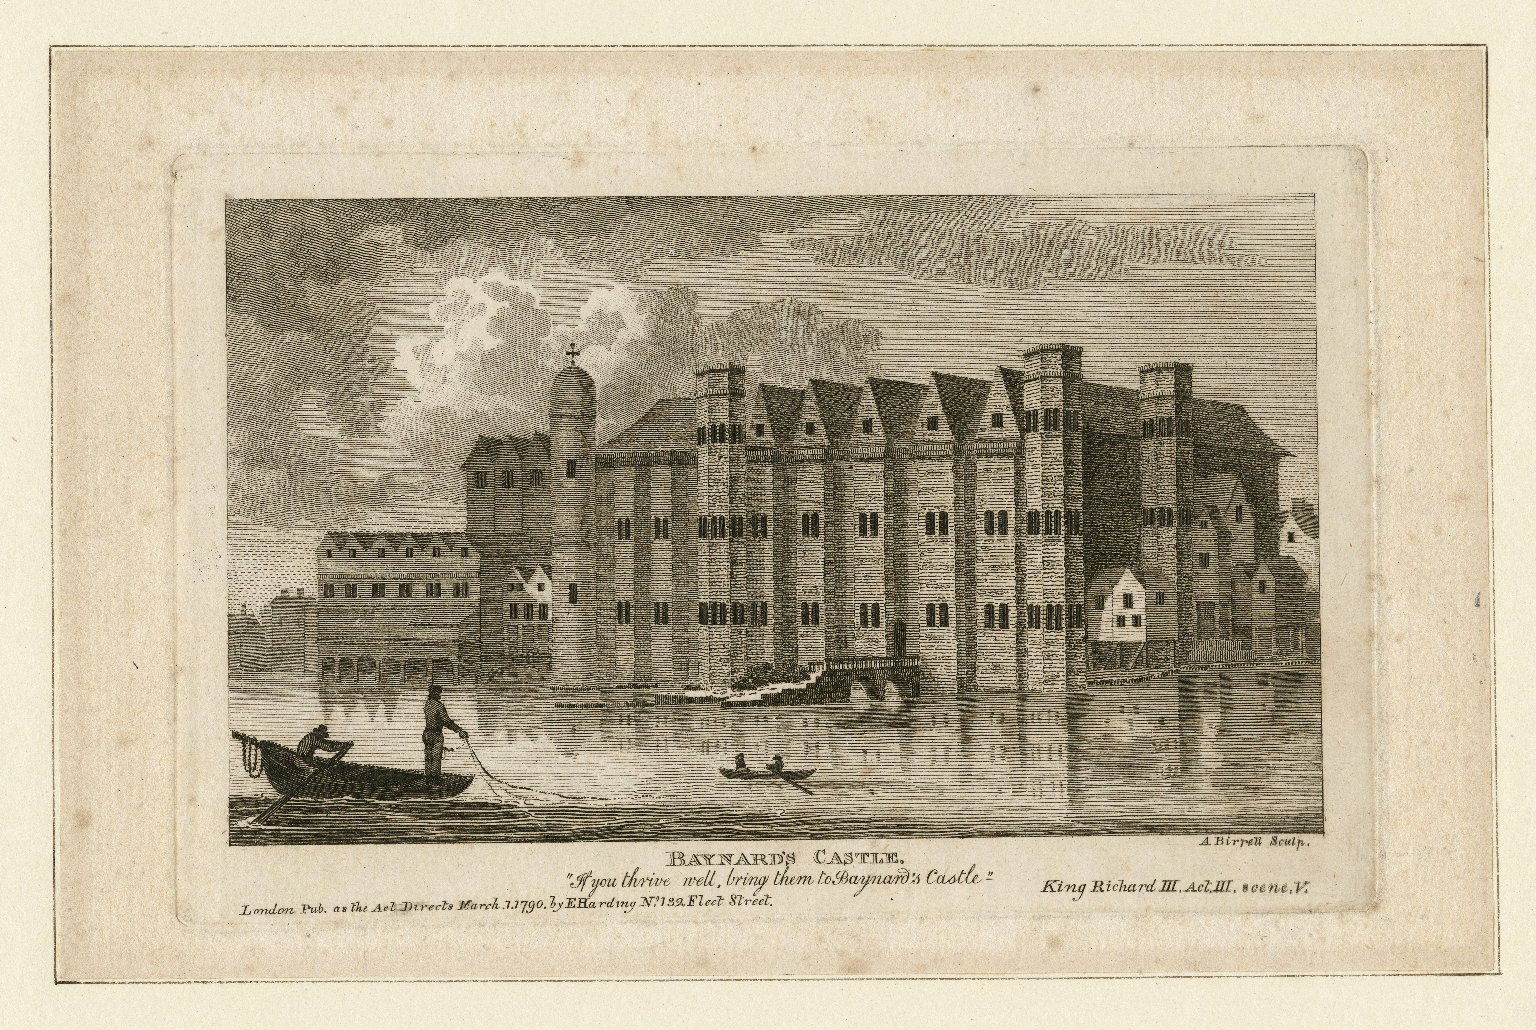 Baynard's Castle was close to The Bishop of London's Palace